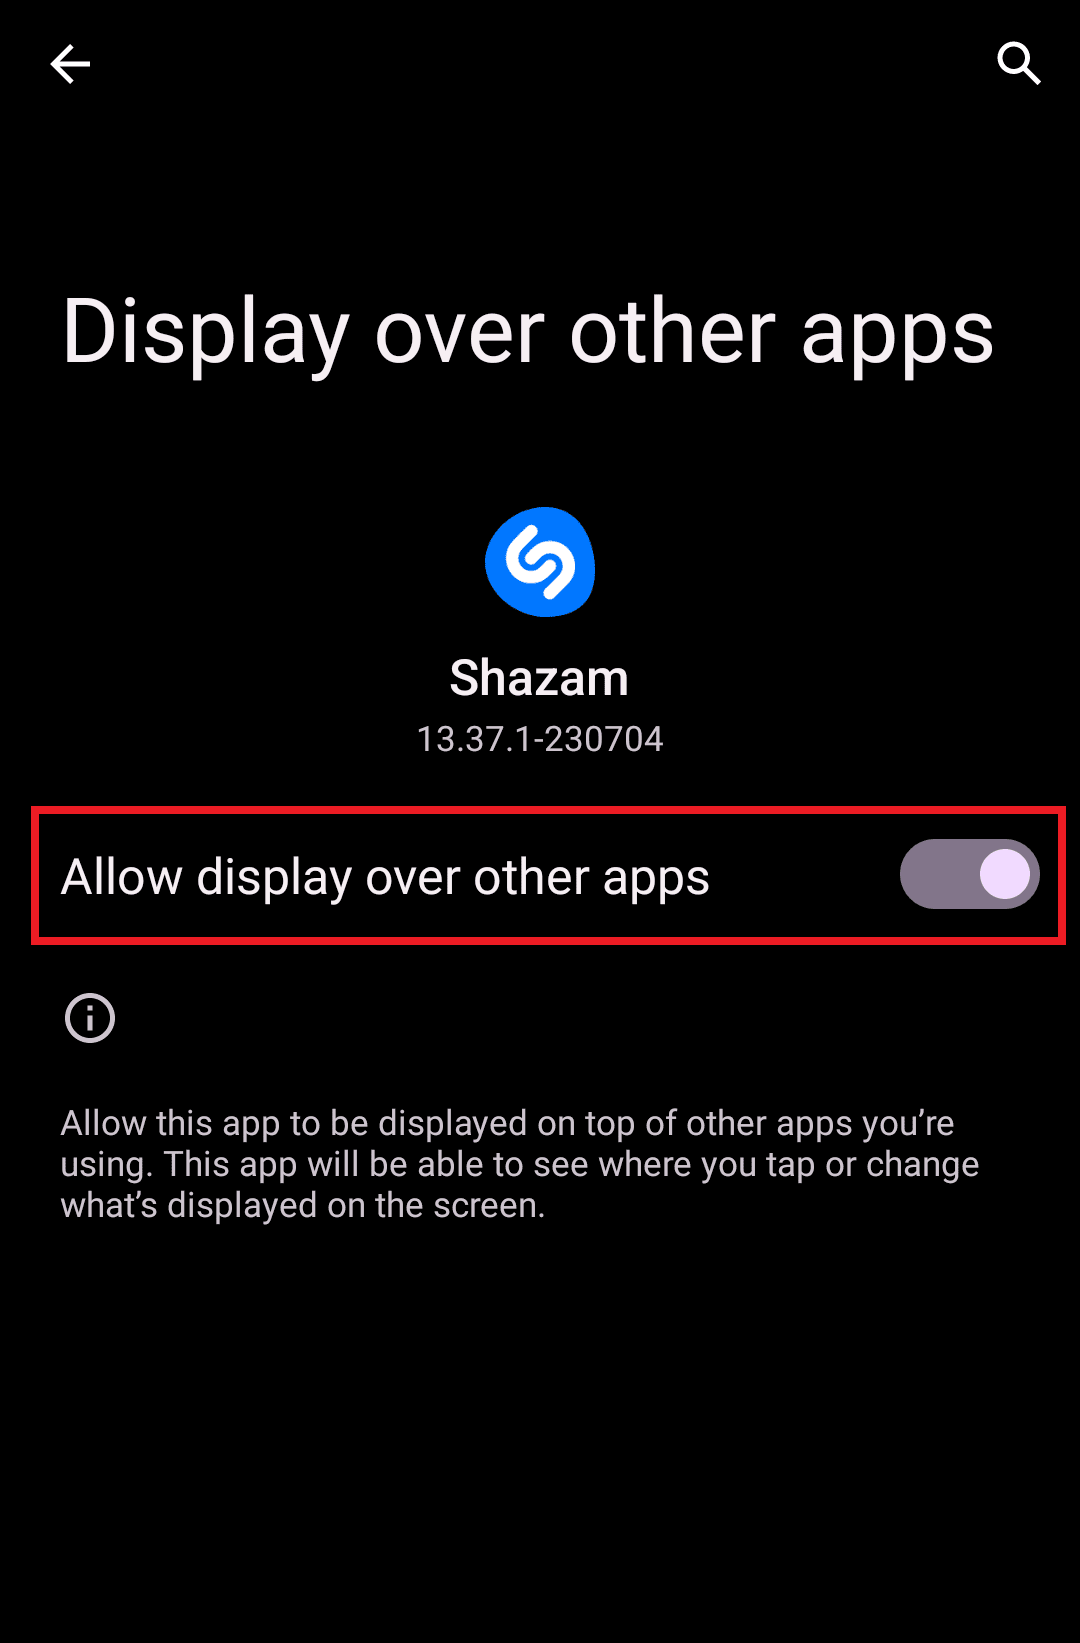 toggle on Allow display over other apps from settings